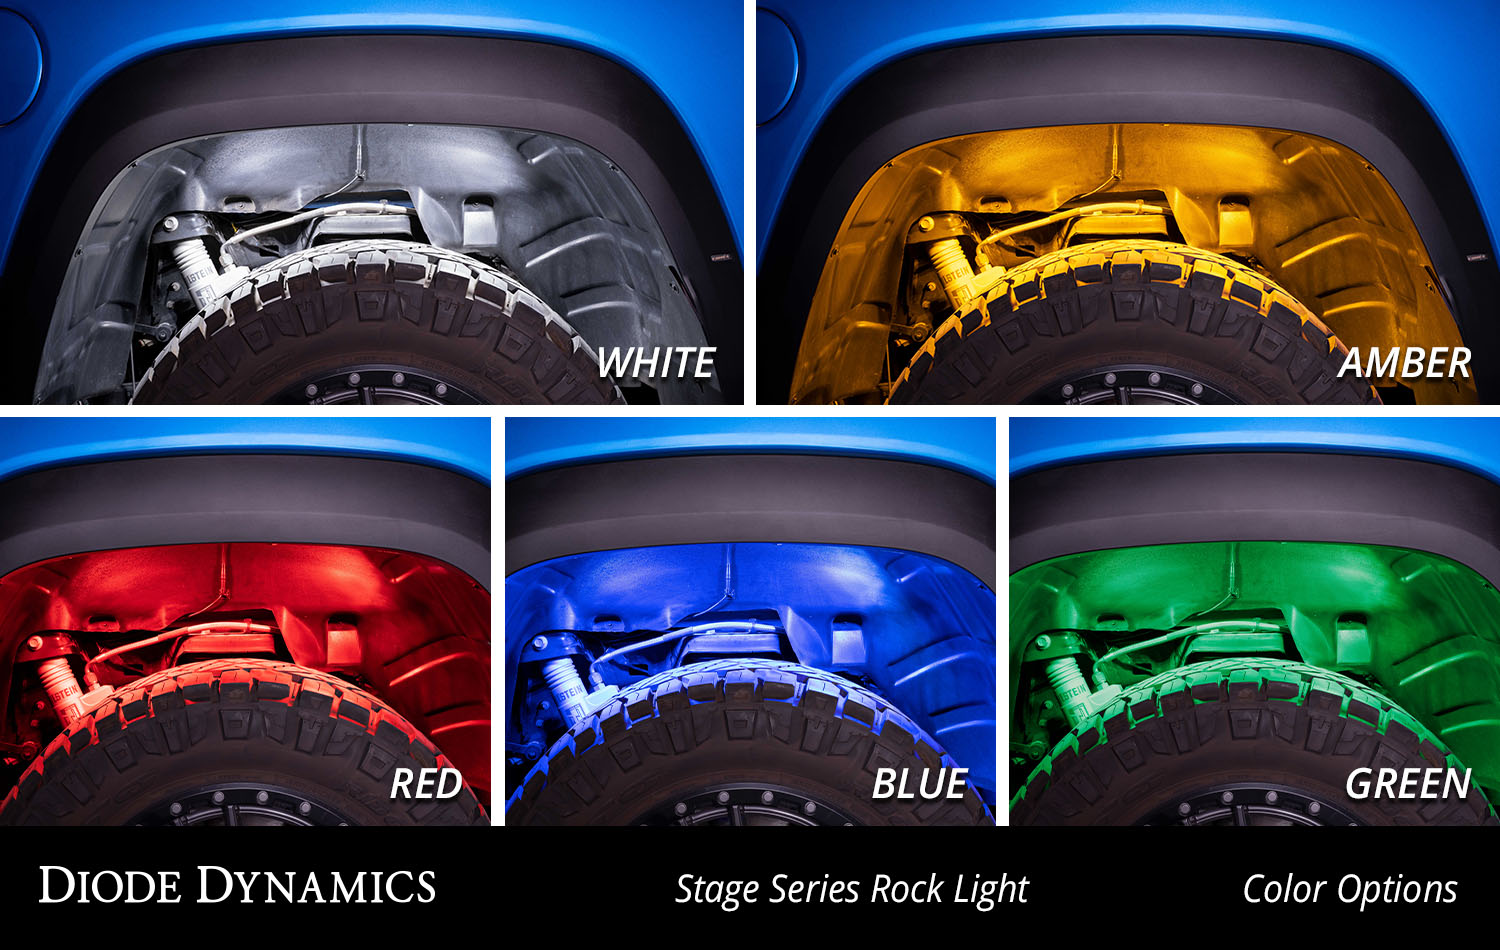 different color rock light examples in wheel well of truck